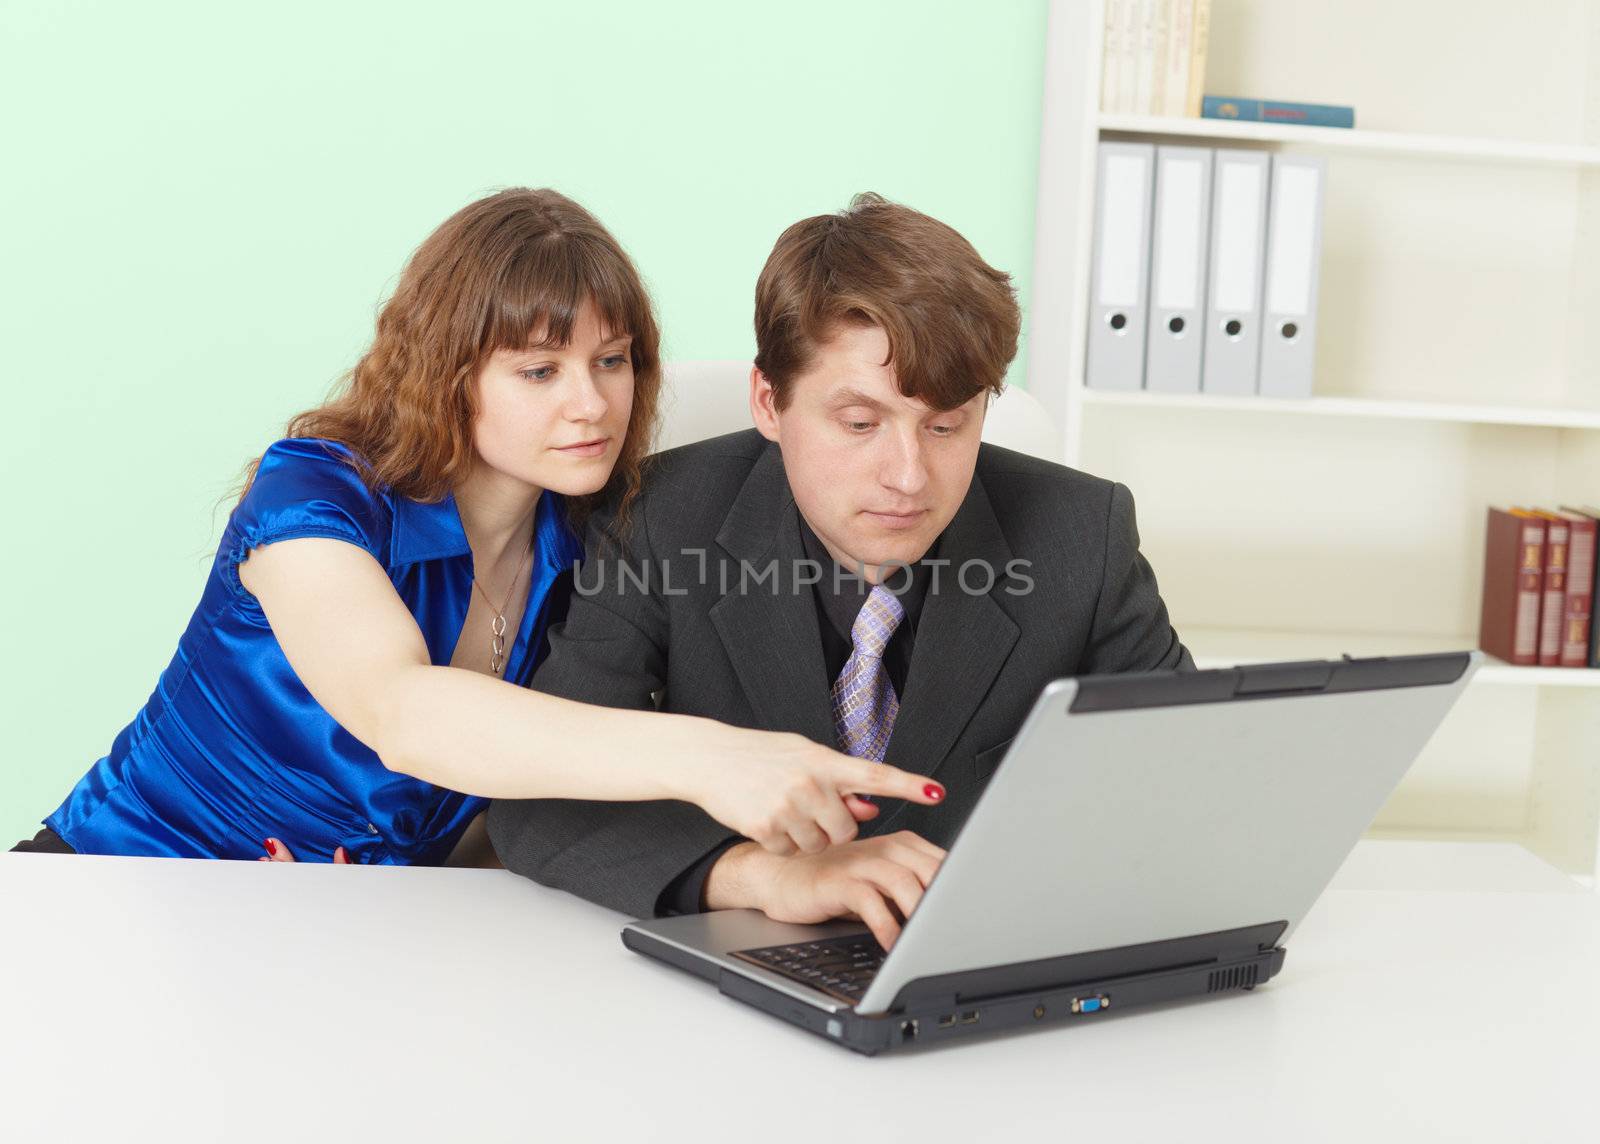 Young people - man and woman working in office by pzaxe